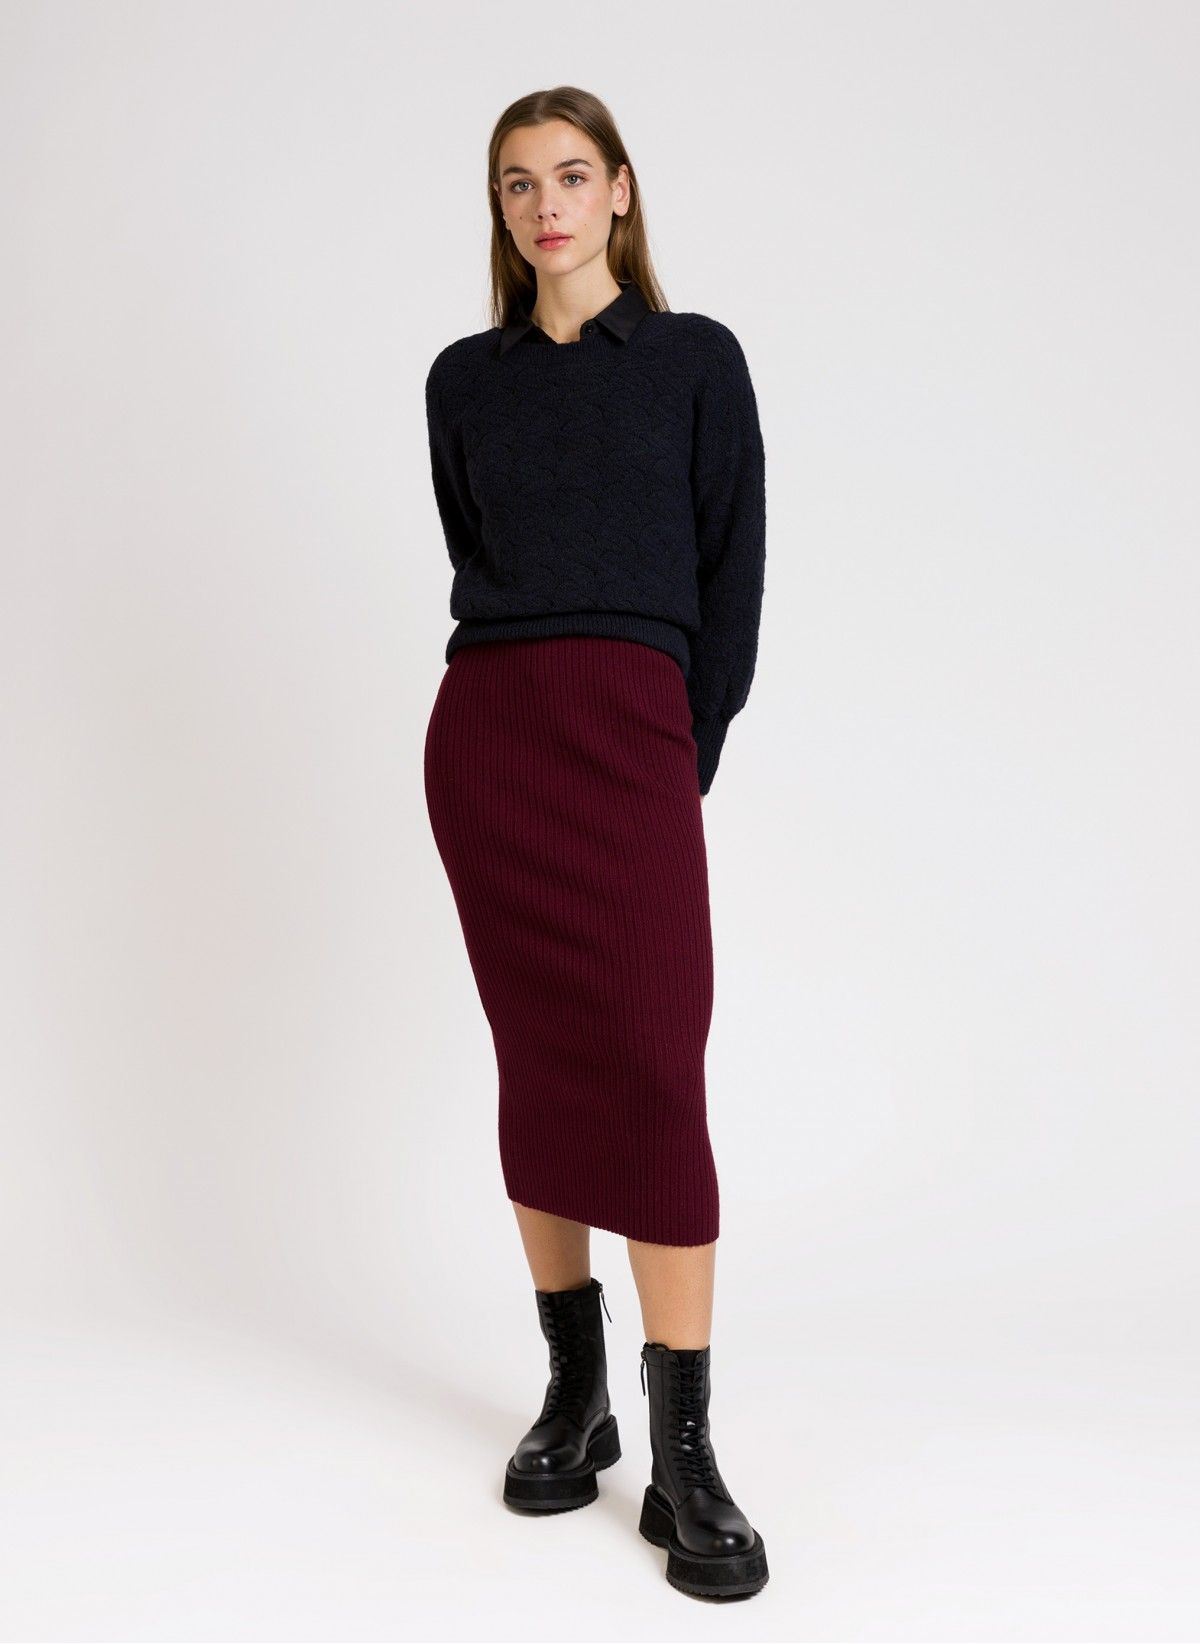 Long skirt in ribbed knitwear LACOTY Ange - 1